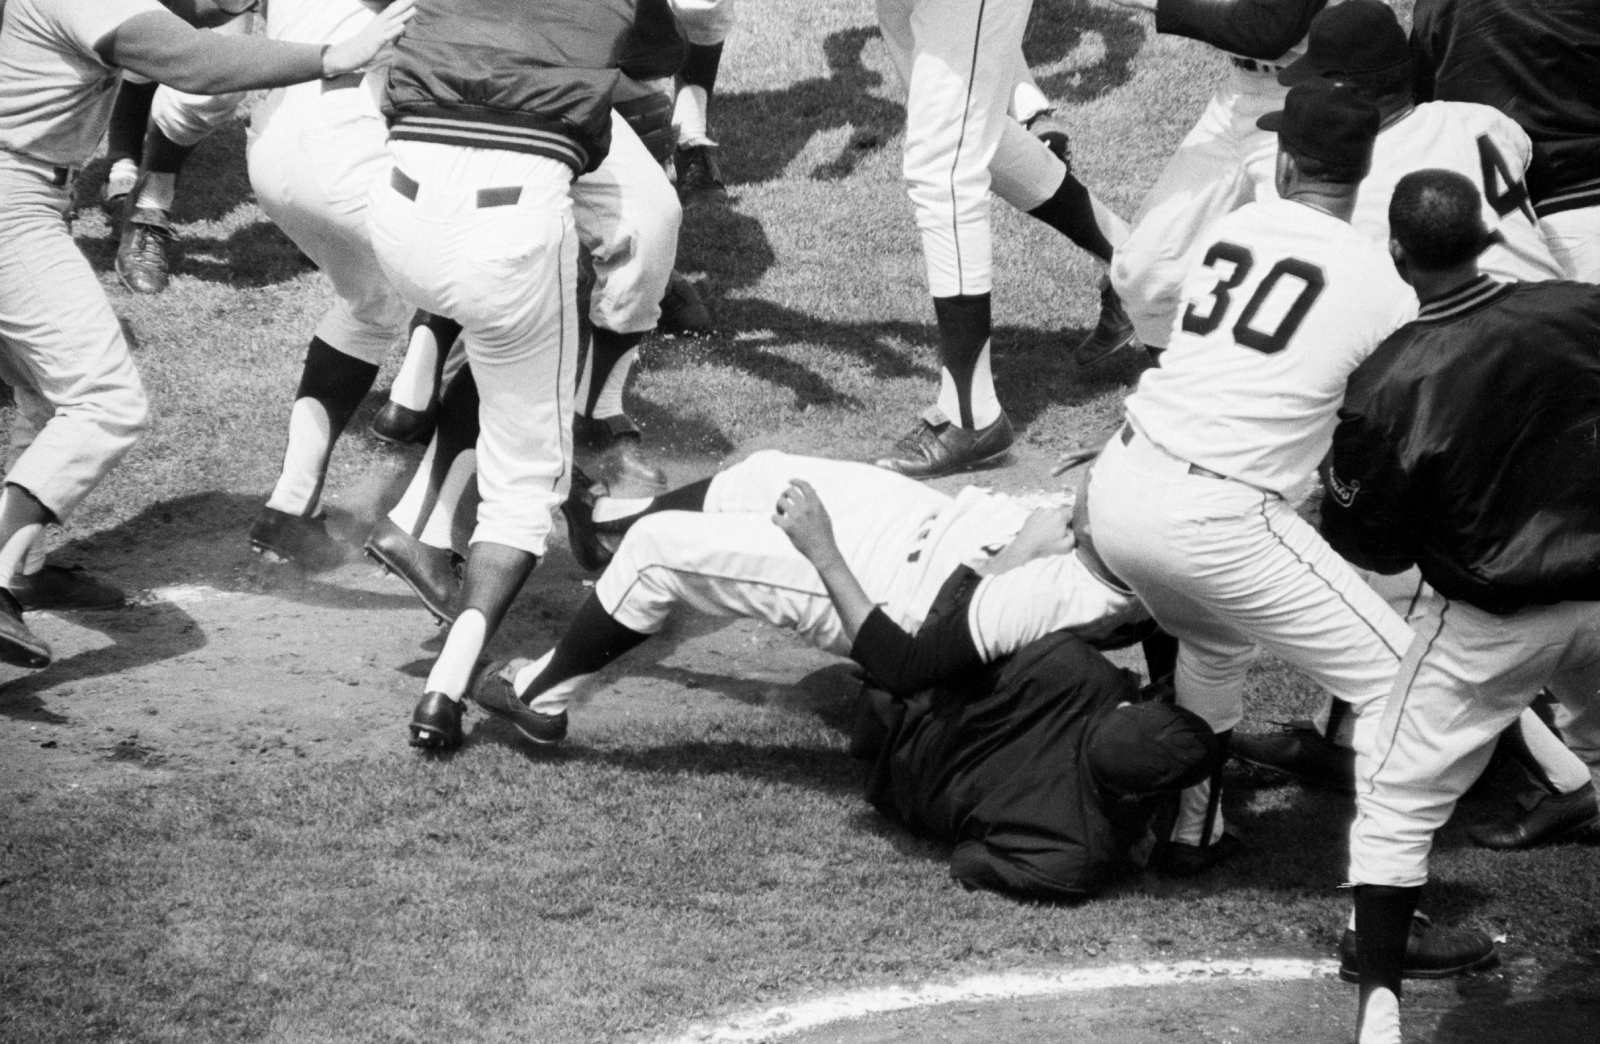 Juan Marichal Ignited What Might Be the Most Horrific Brawl in MLB History